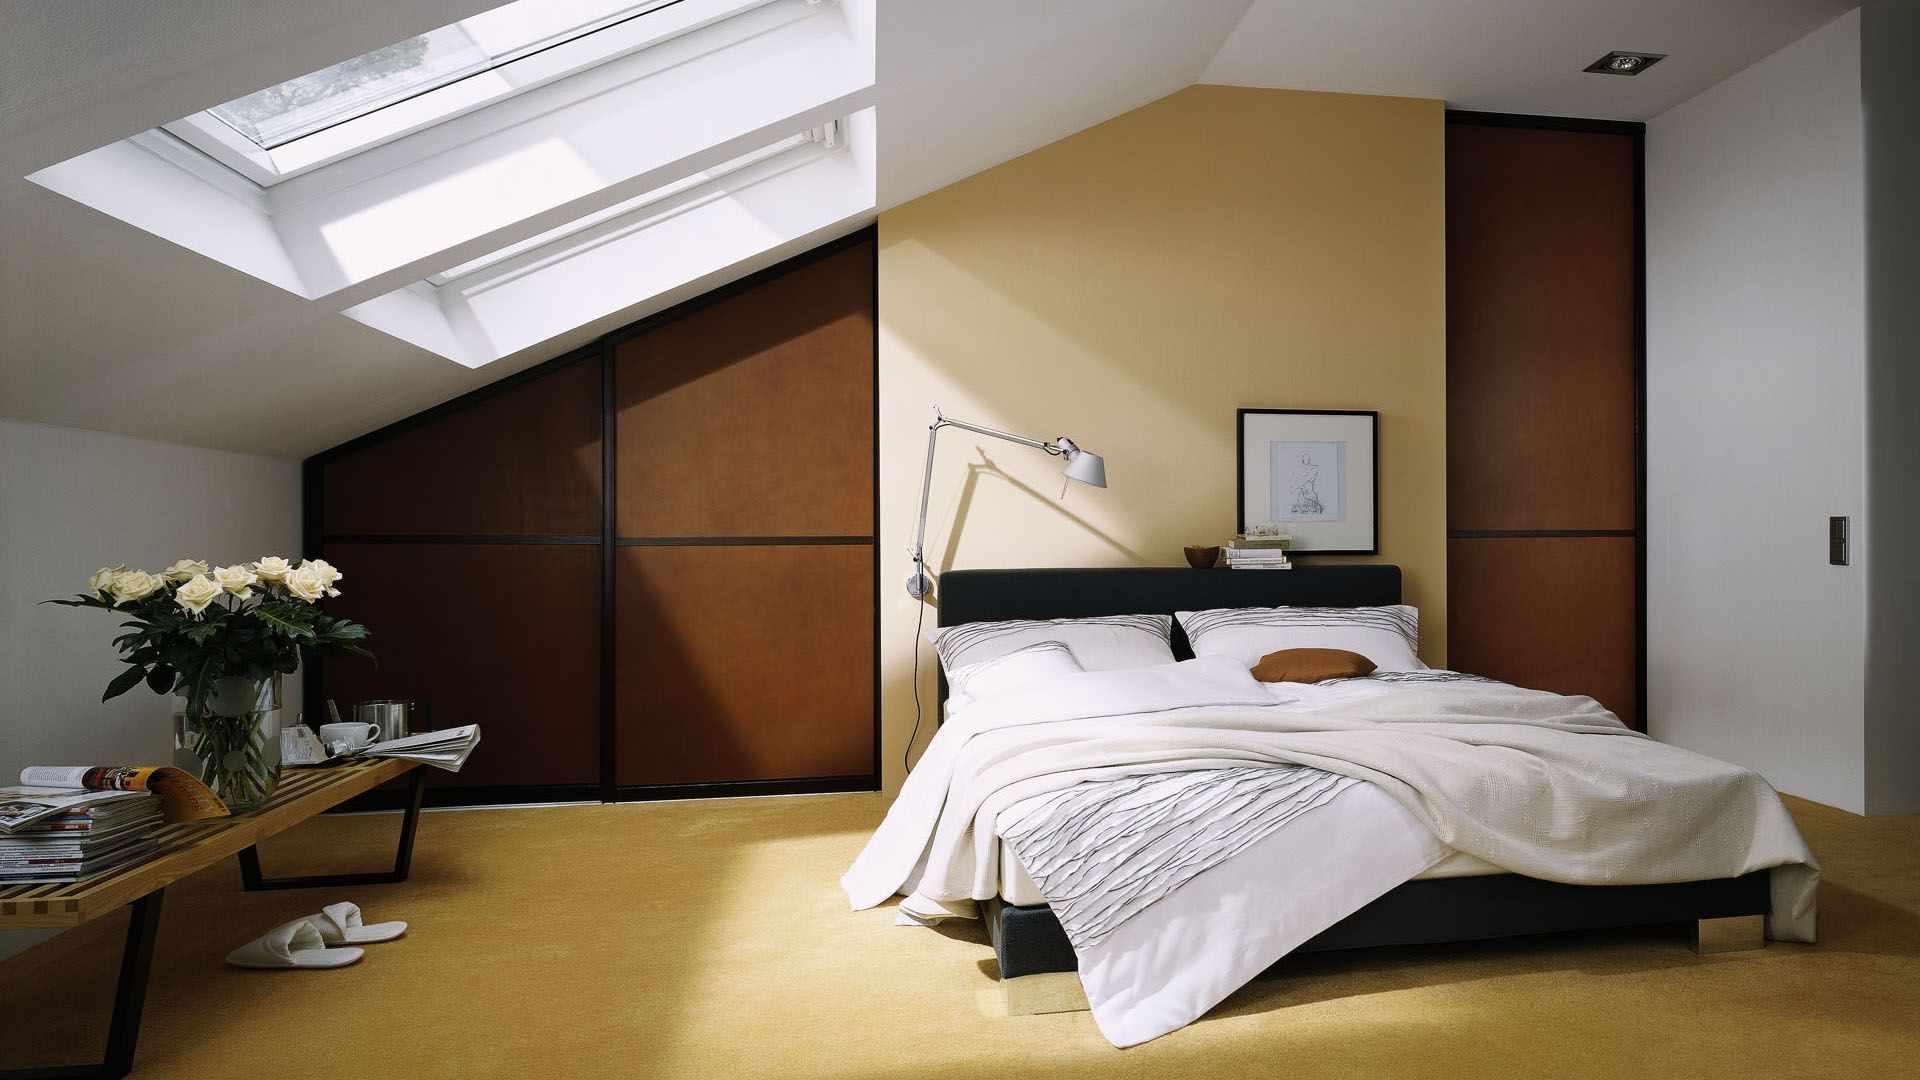 variant of the bright design of the attic bedroom